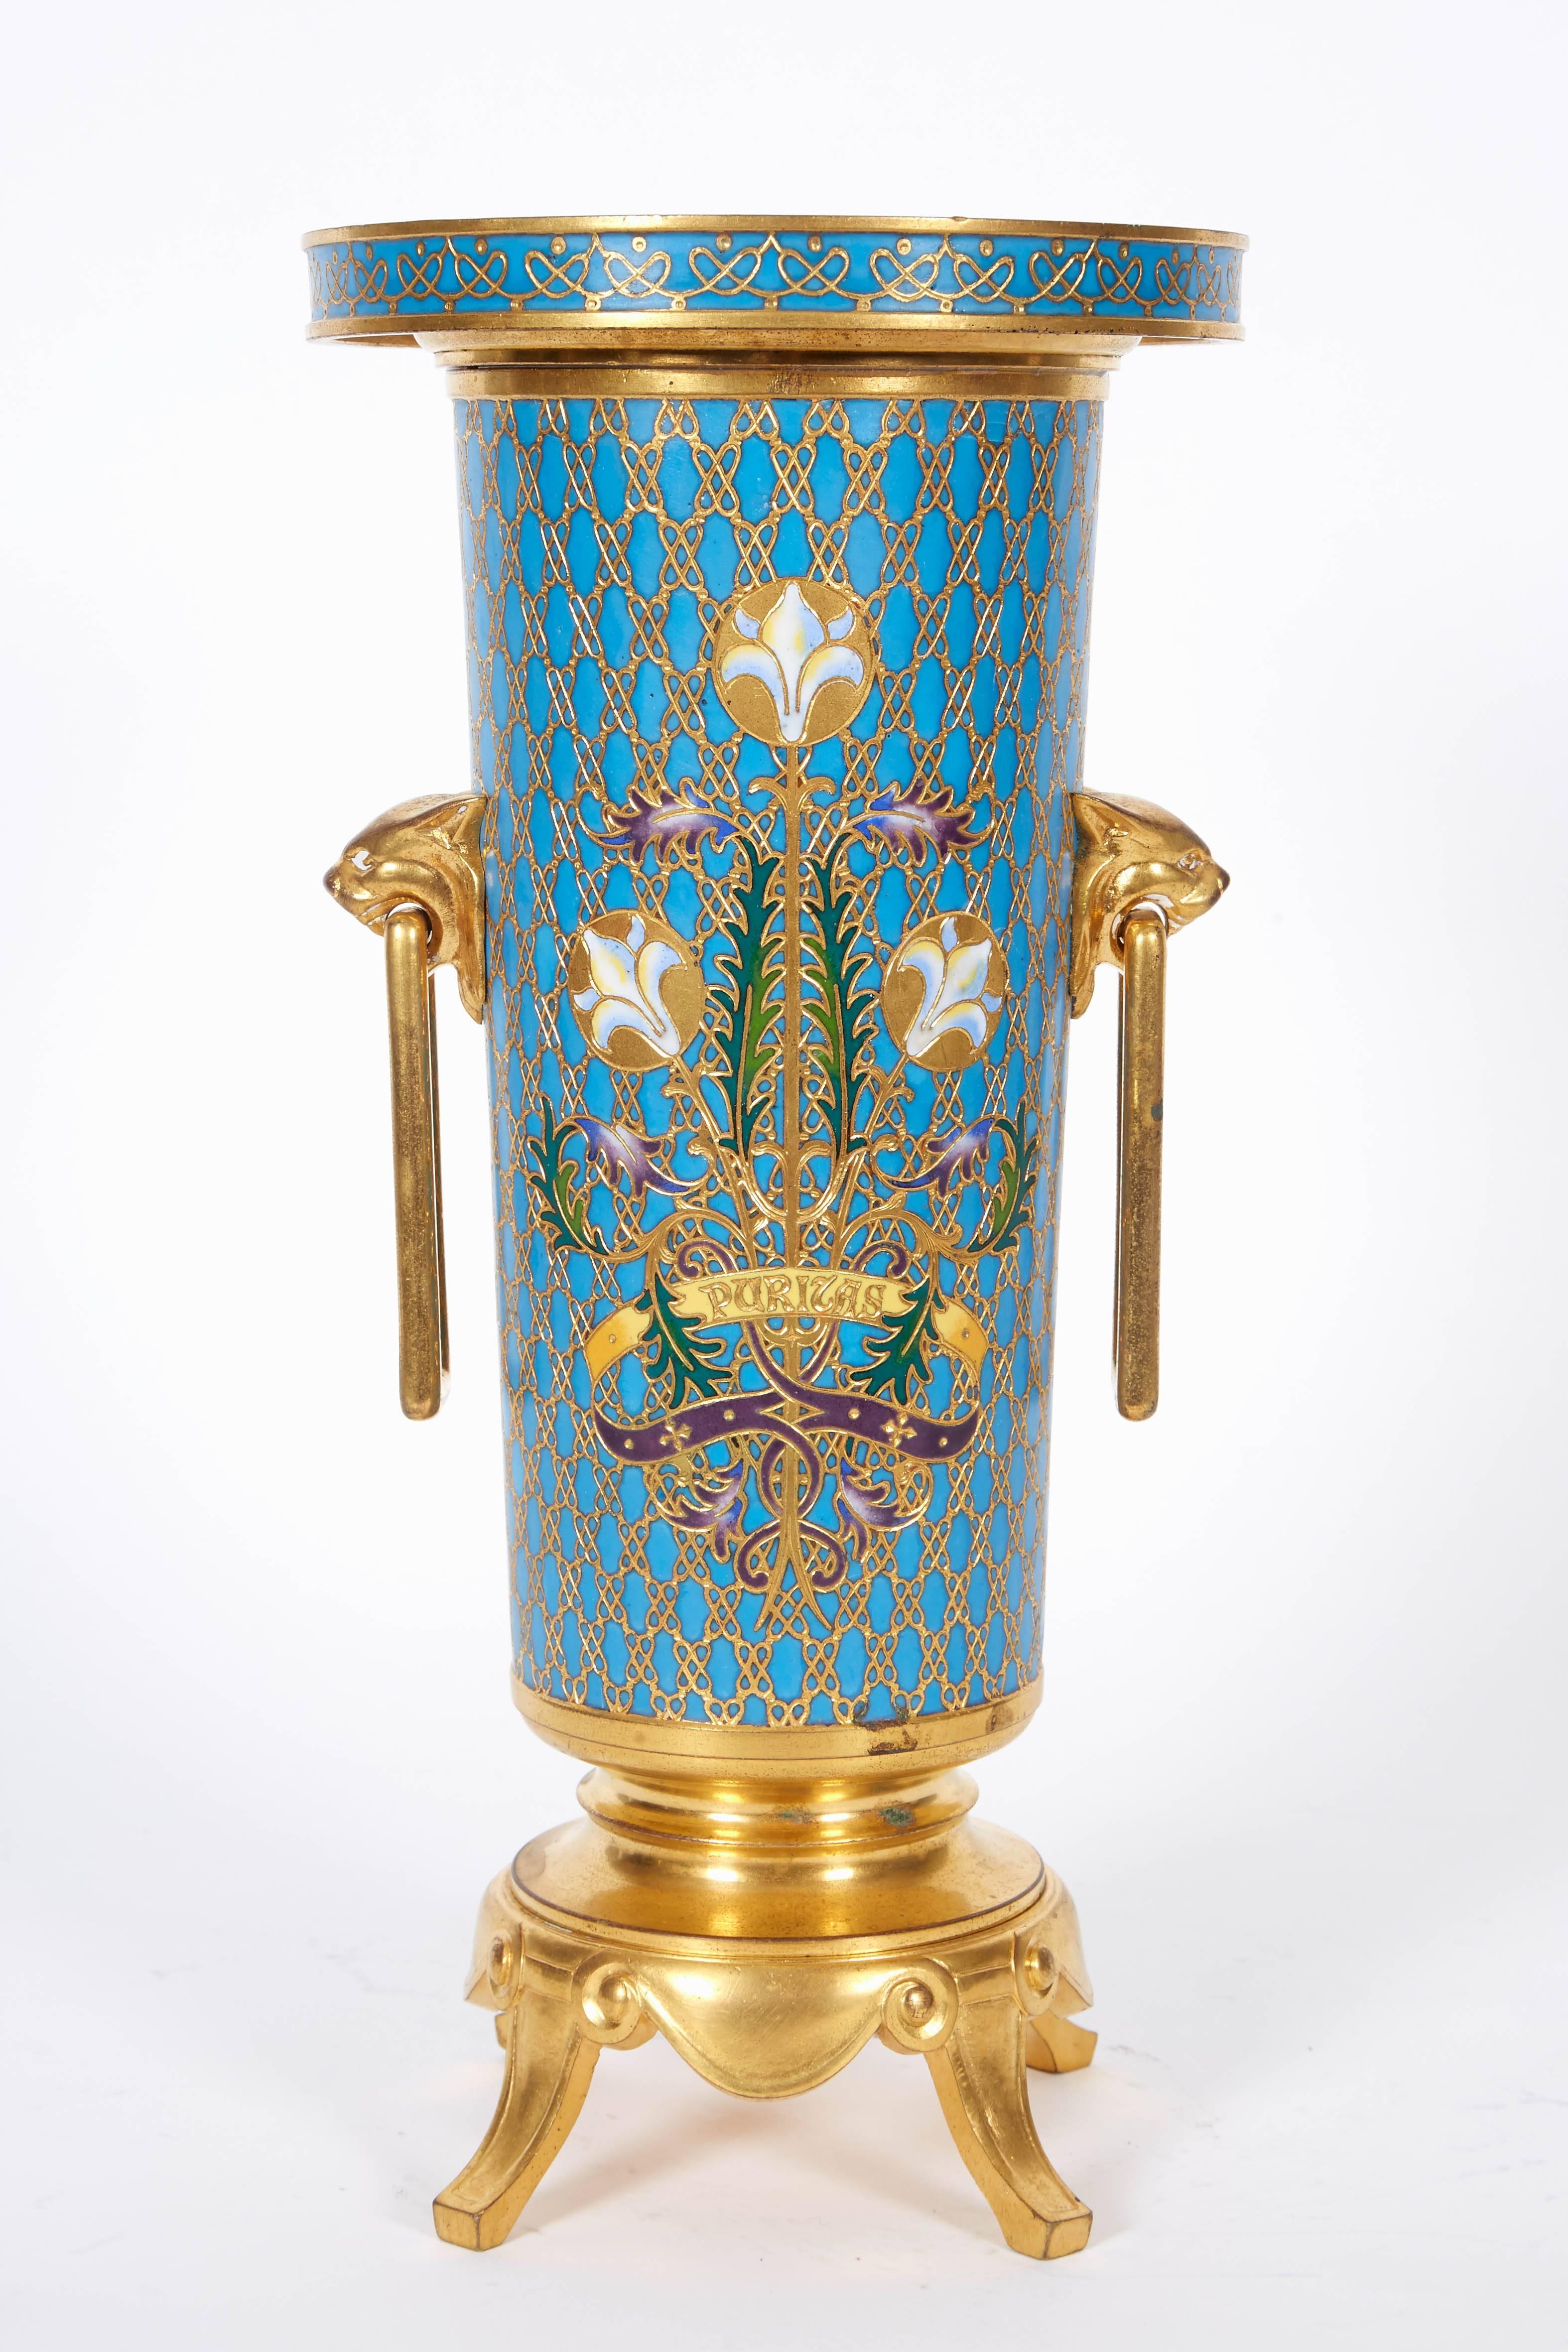 French Gilt Bronze and Champleve Cloisonne Enamel Vase by Ferdinand Barbedienne 1